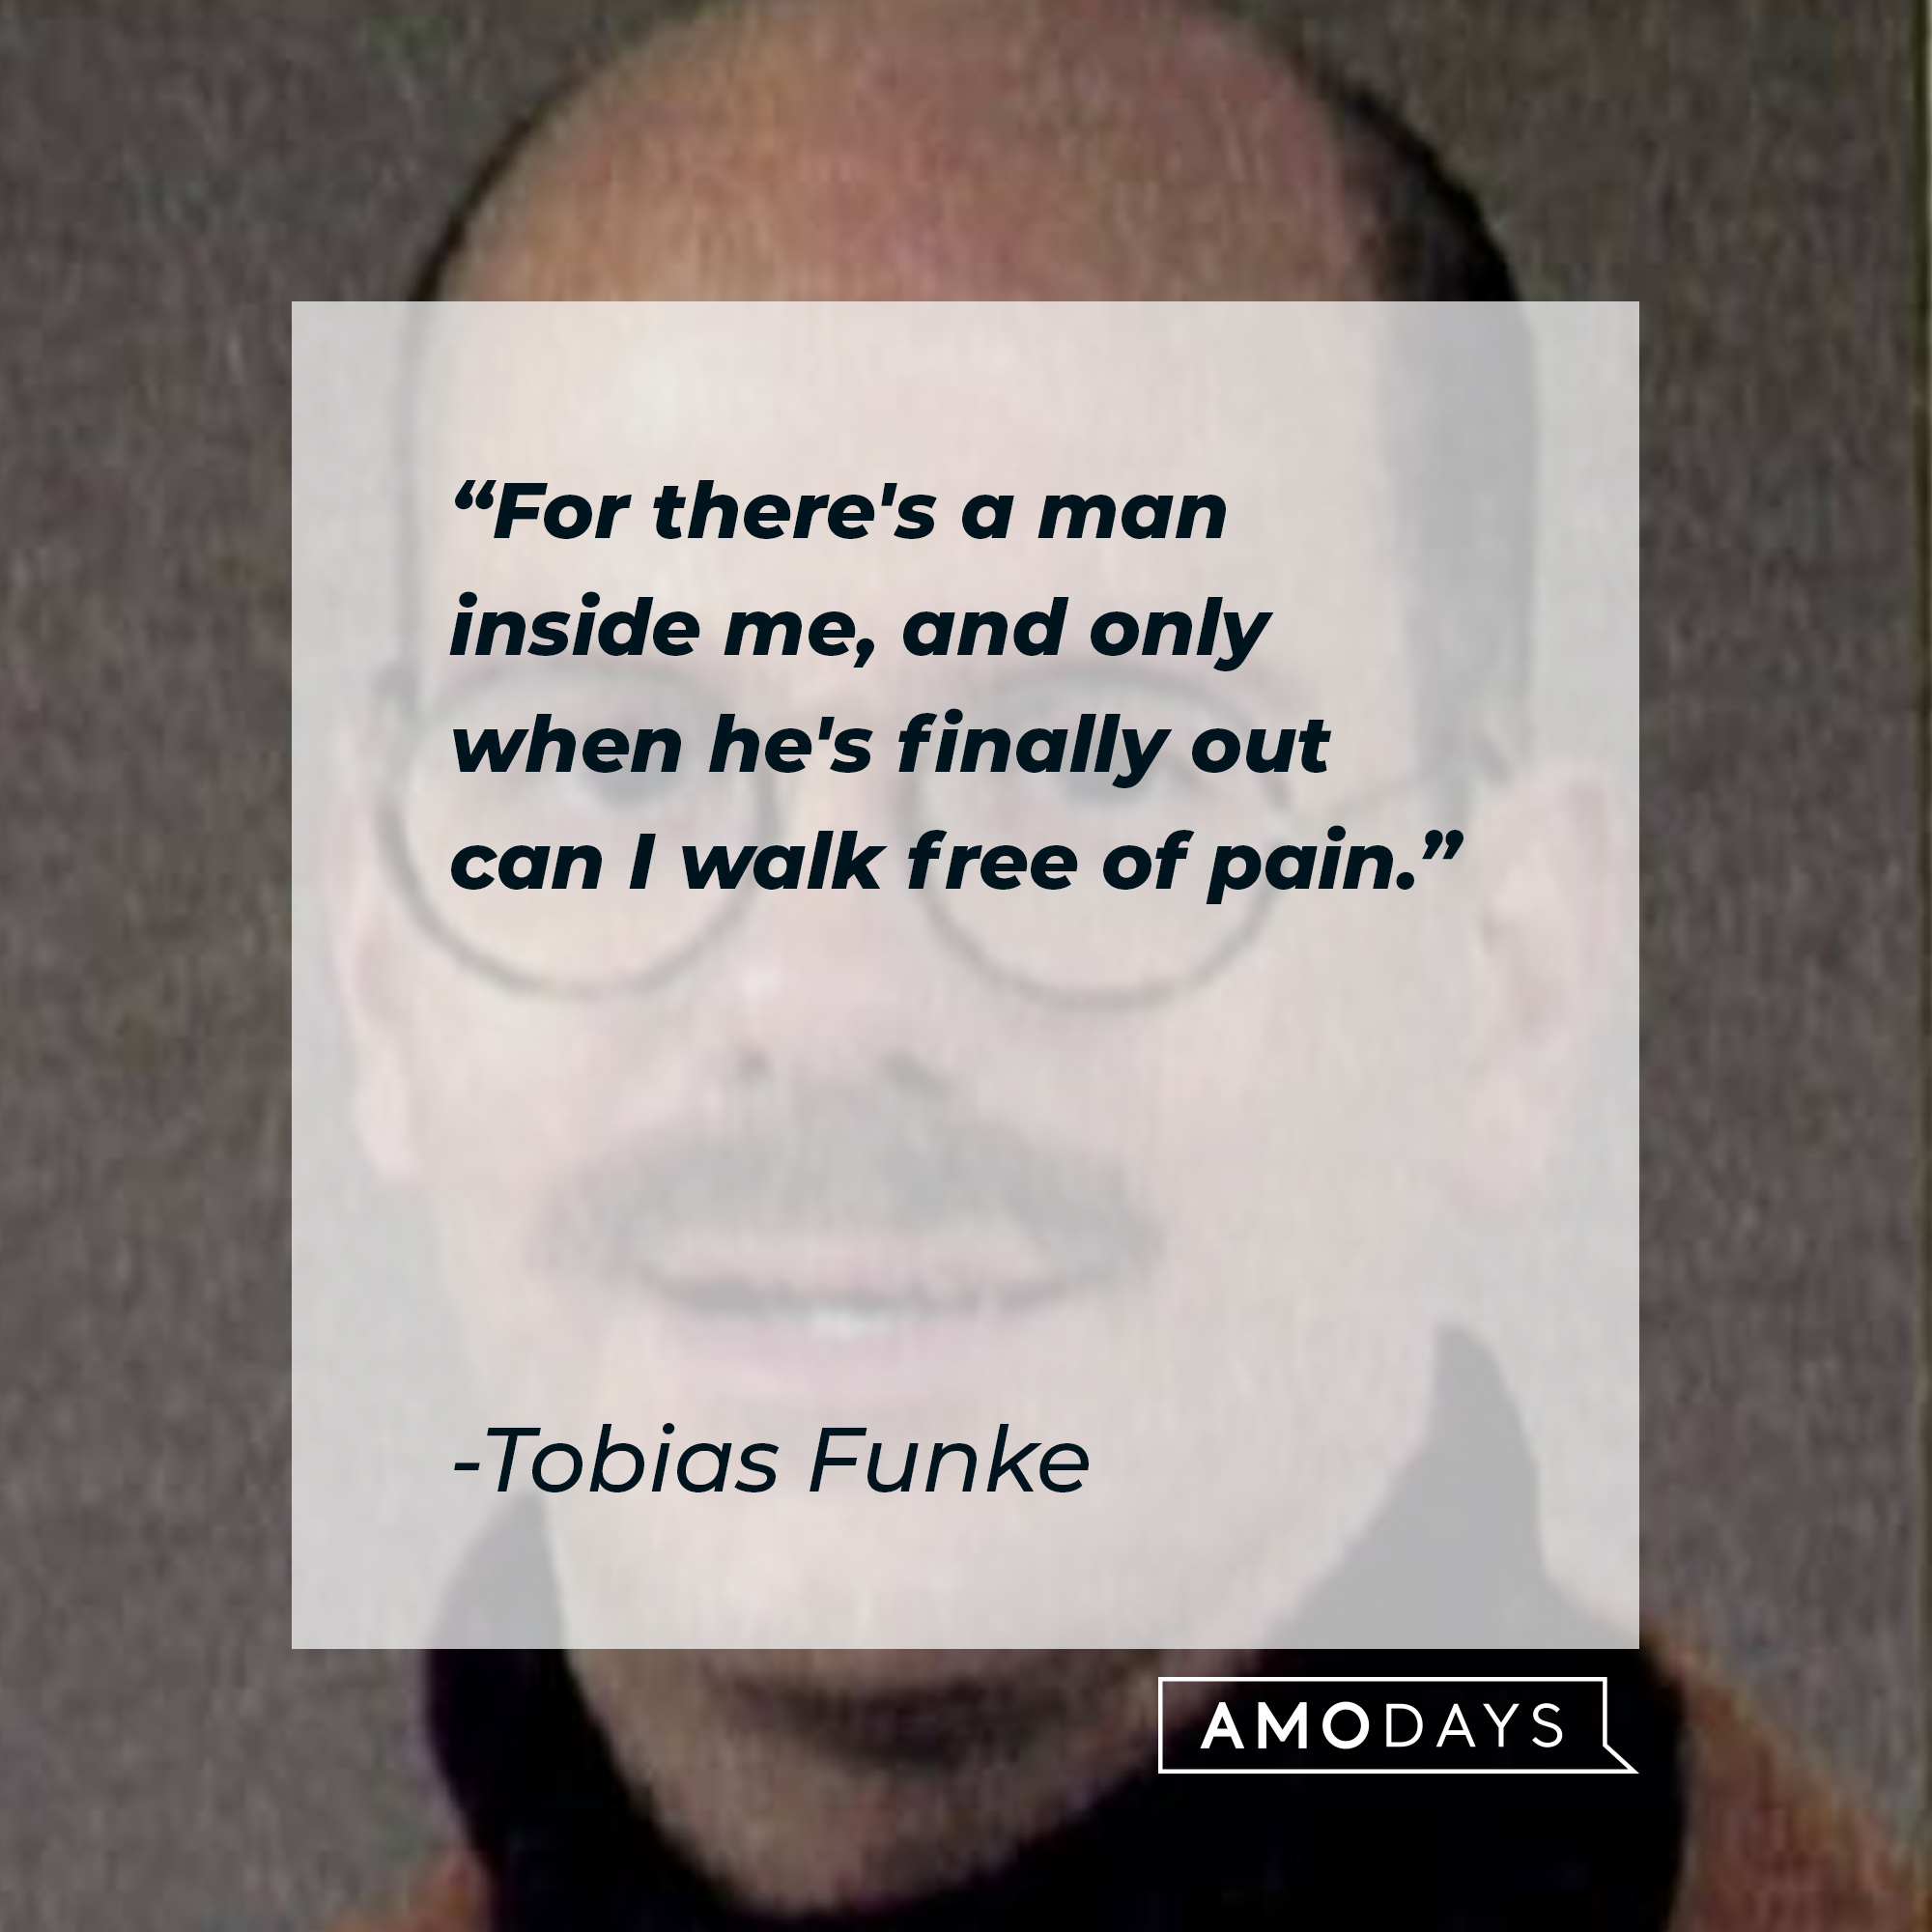 Tobias Funke's quote: "For there's a man inside me, and only when he's finally out can I walk free of pain." | Source: Facebook.com/ArrestedDevelopment